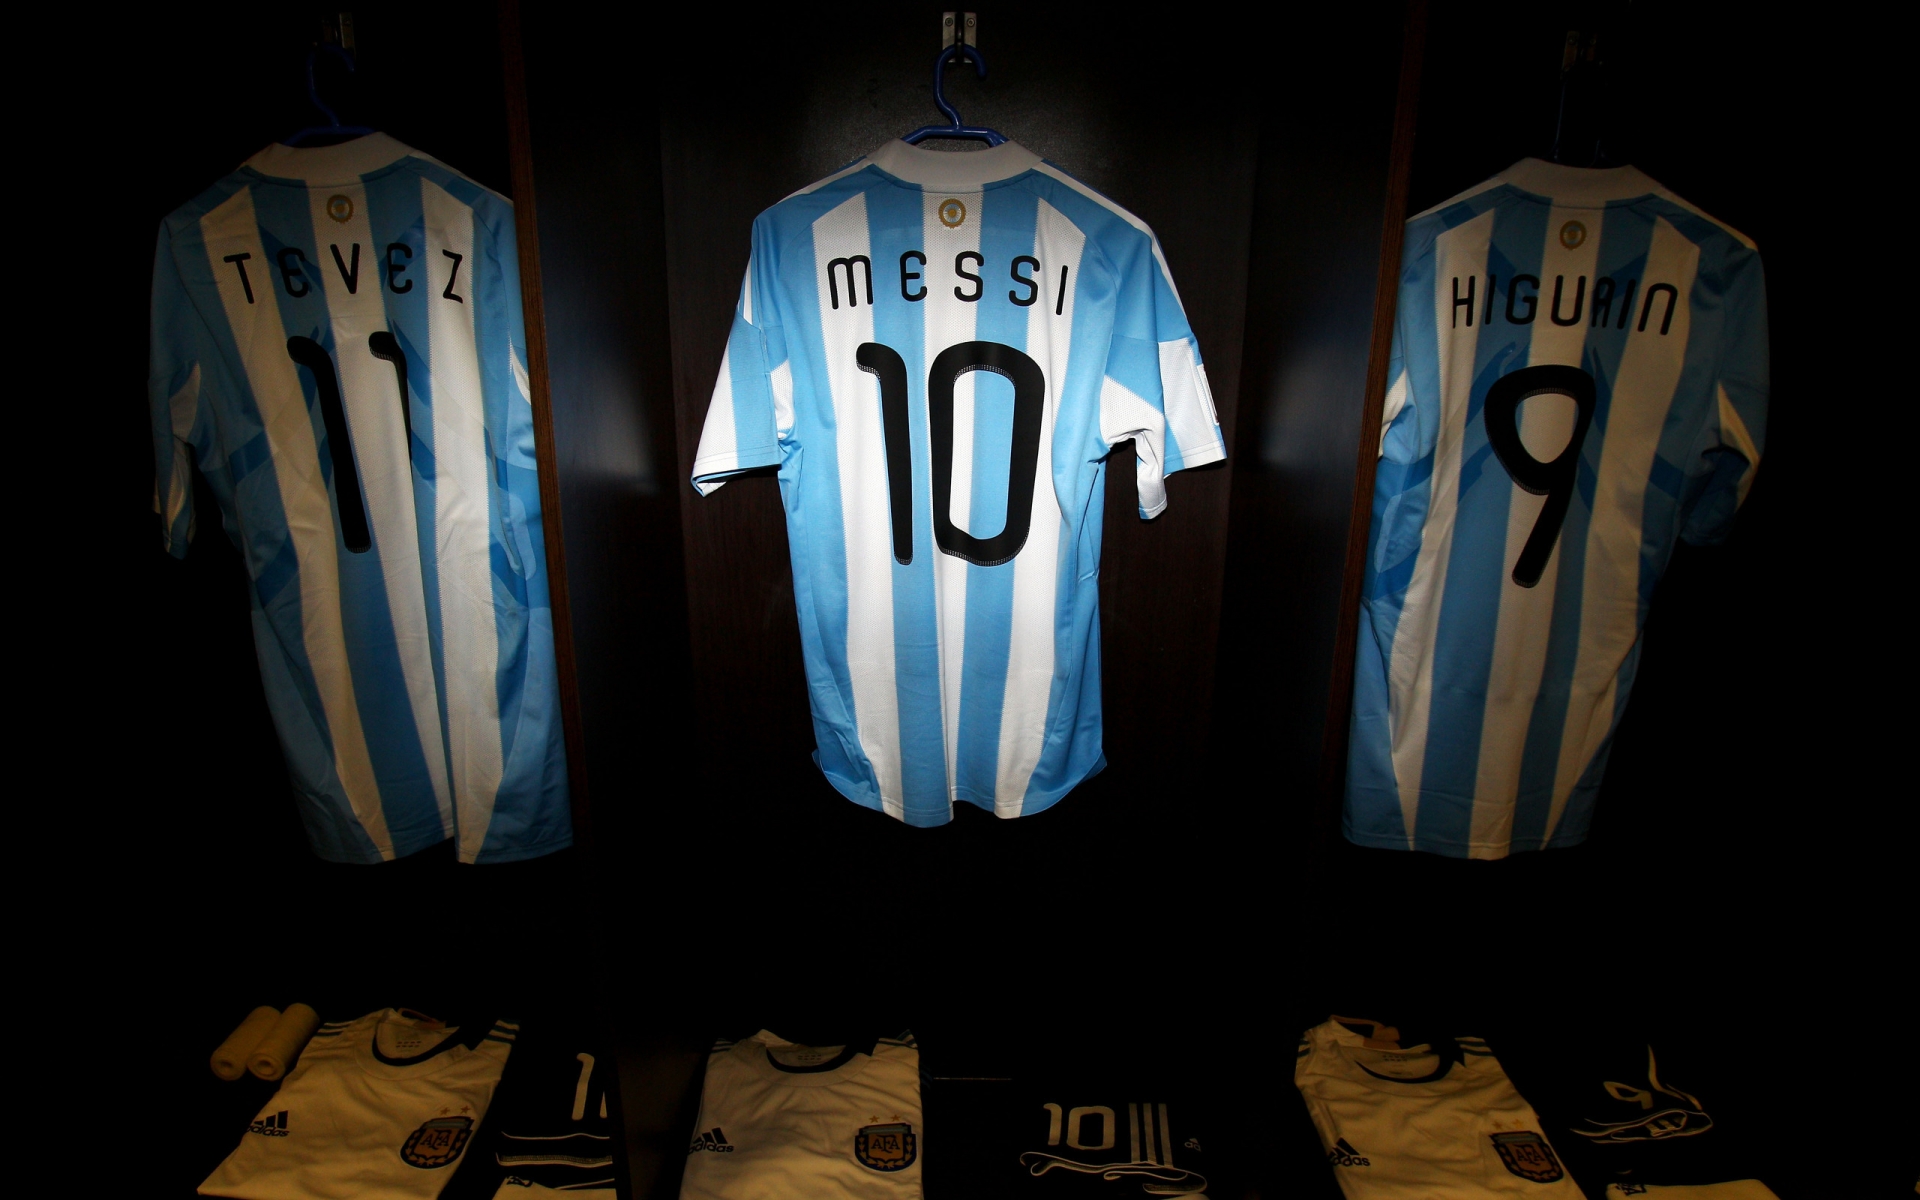 Tshirt of Messi, Tevez and Higuain for 1920 x 1200 widescreen resolution